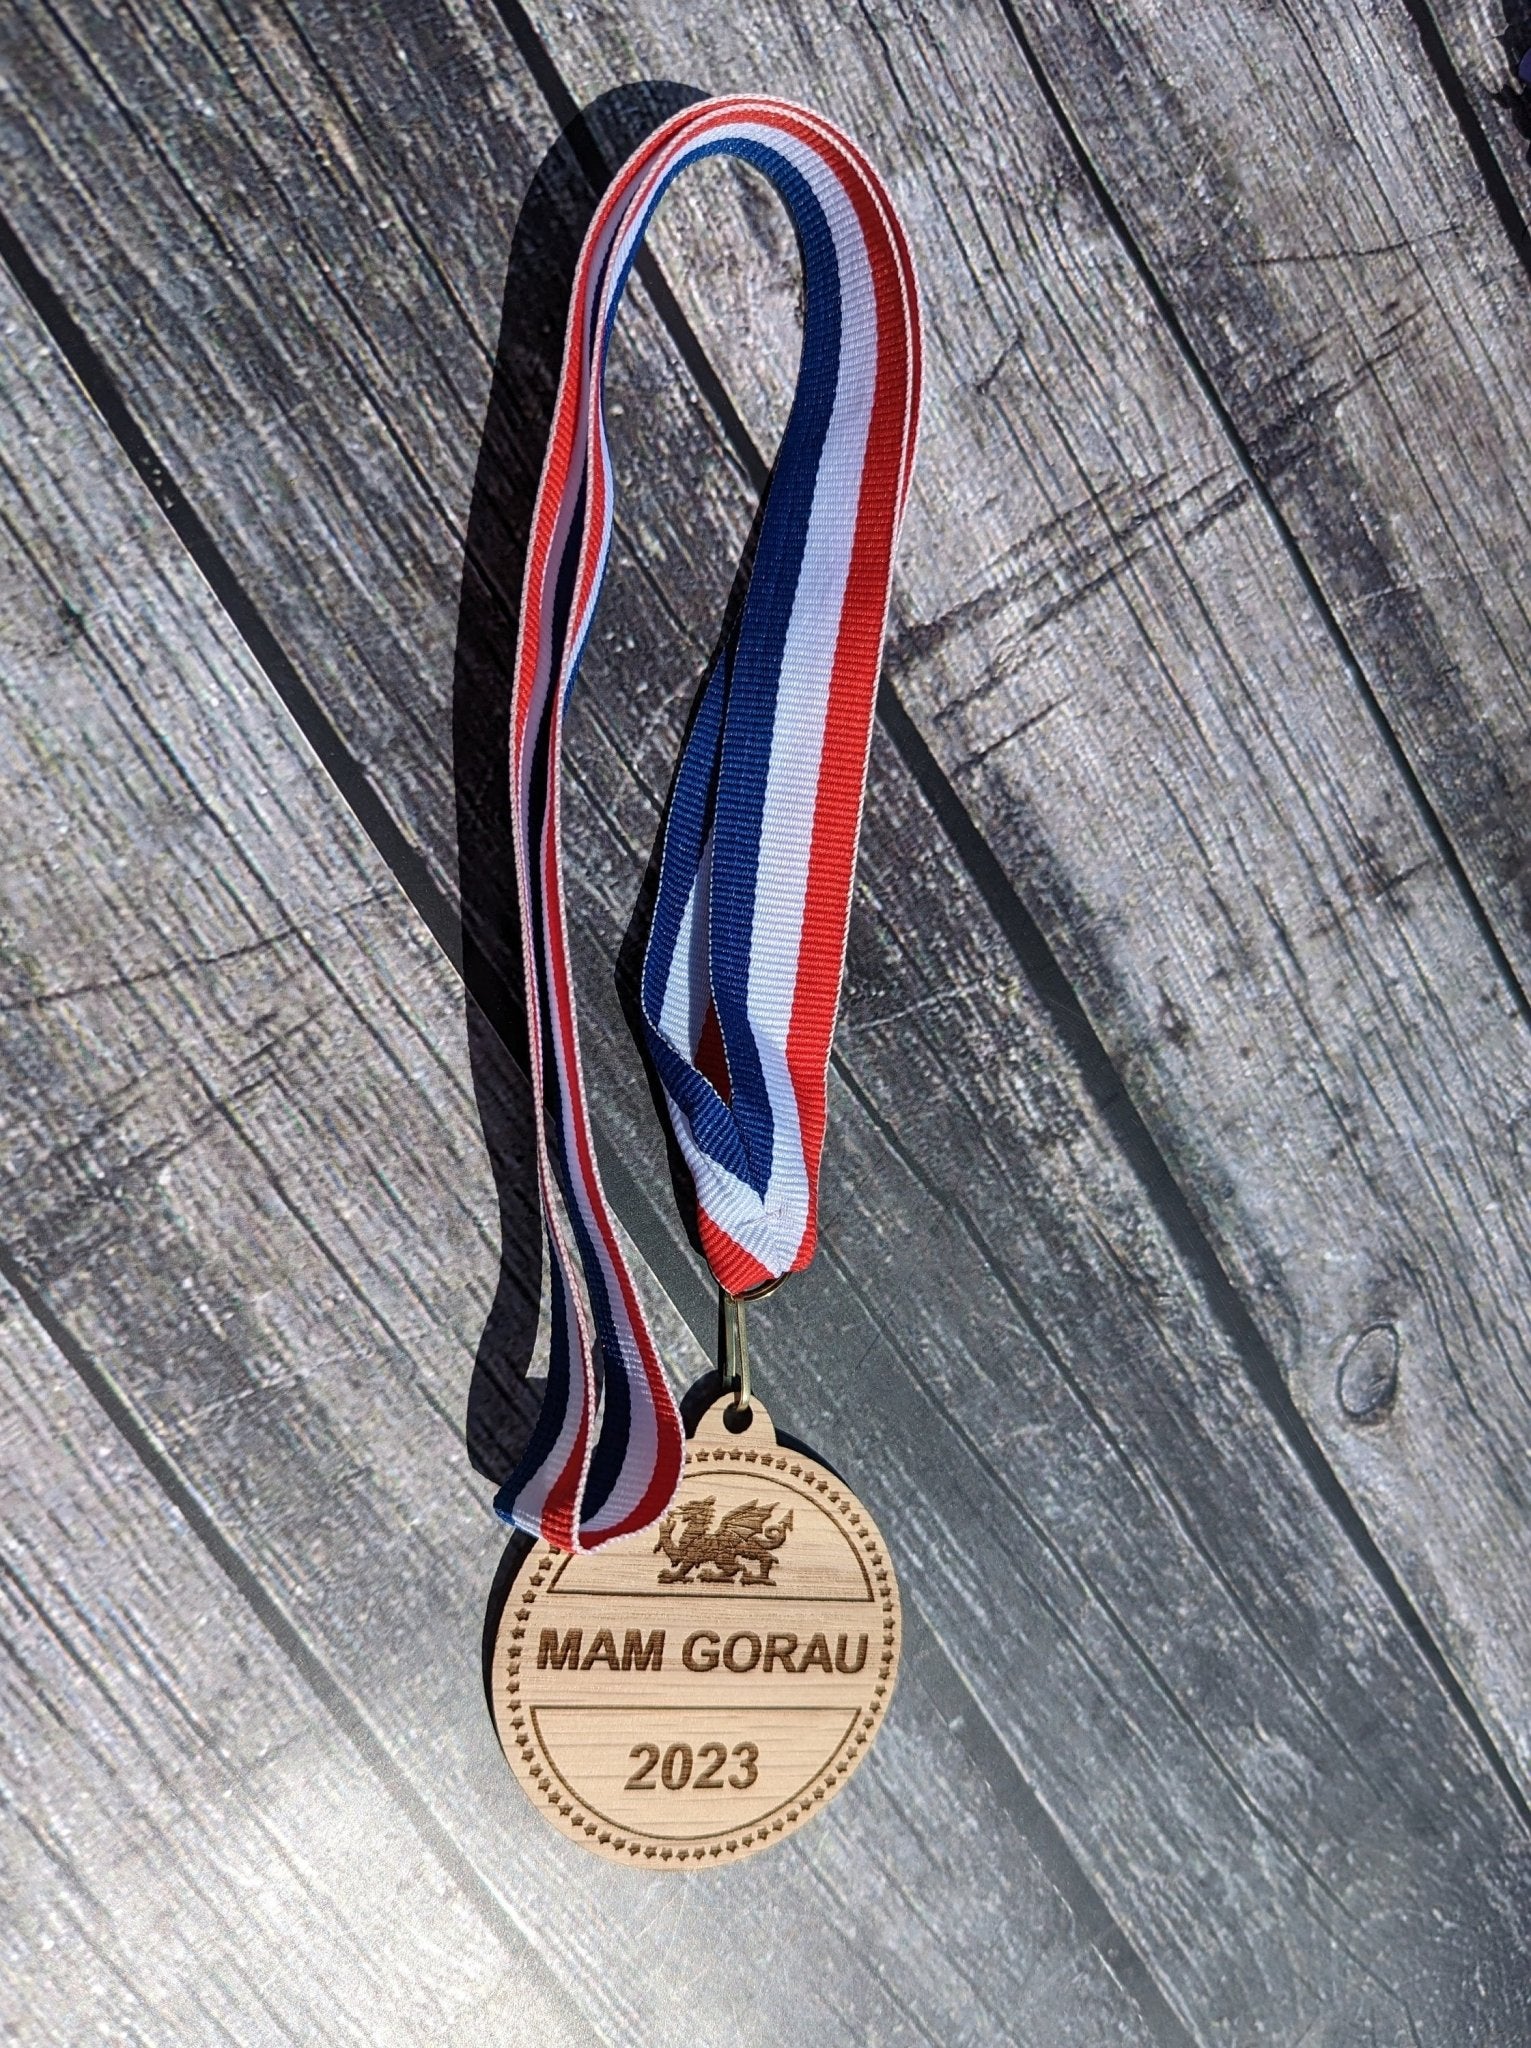 Best Mam & Mam Gorau Medals with Welsh Dragon - Meaningful Gifts, Birthday Gift, Mother's Day Gift - CherryGroveCraft